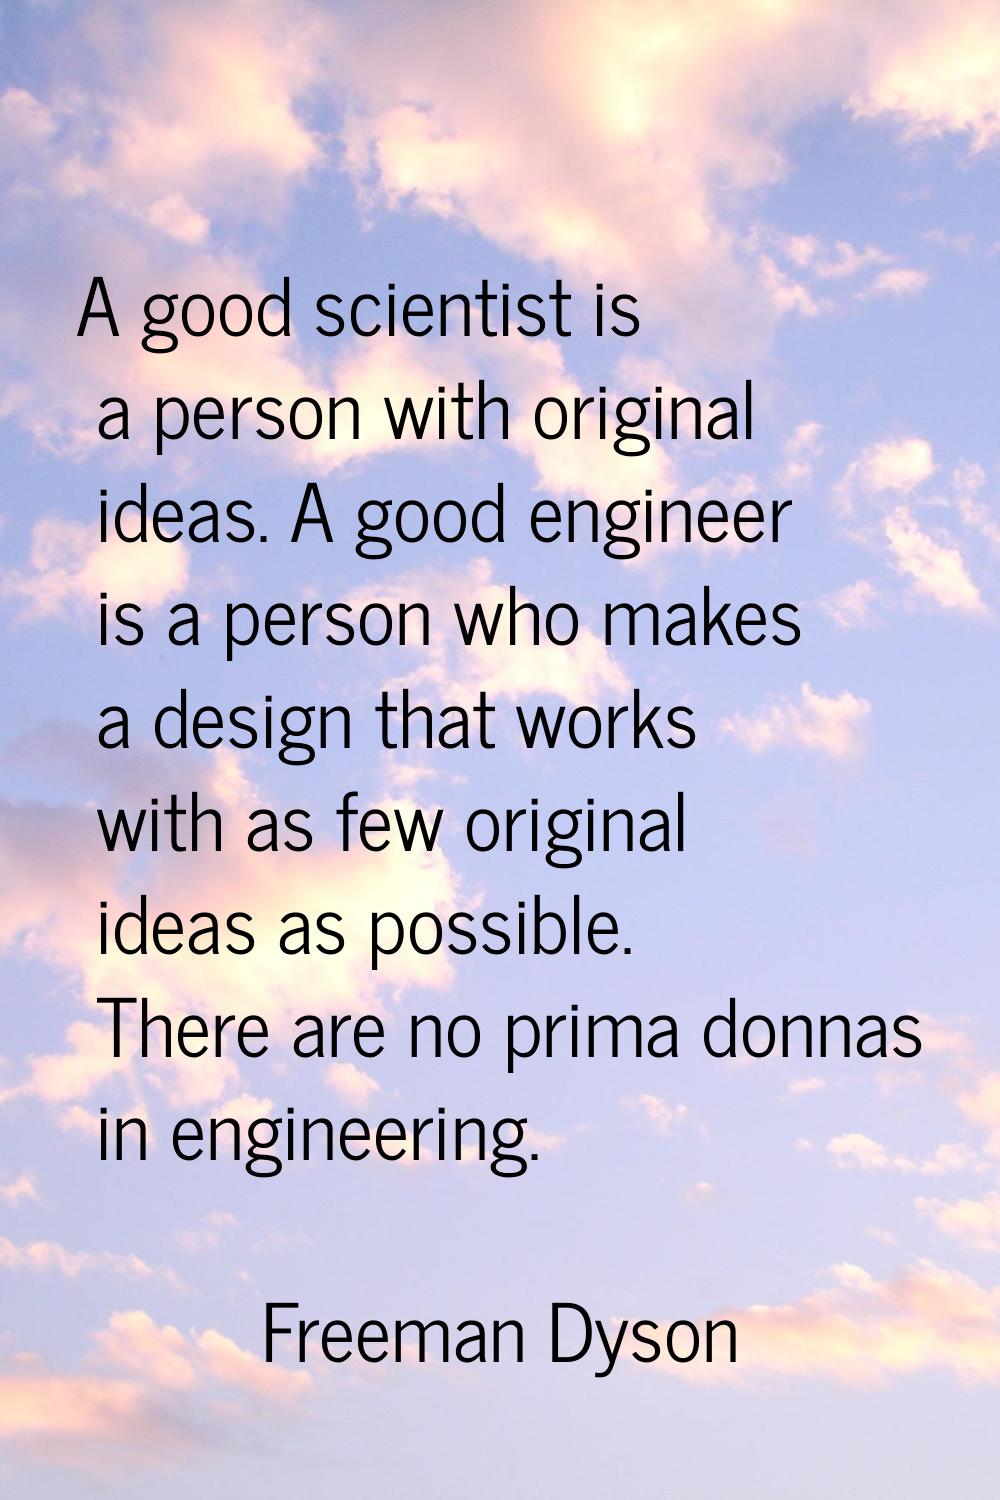 A good scientist is a person with original ideas. A good engineer is a person who makes a design th